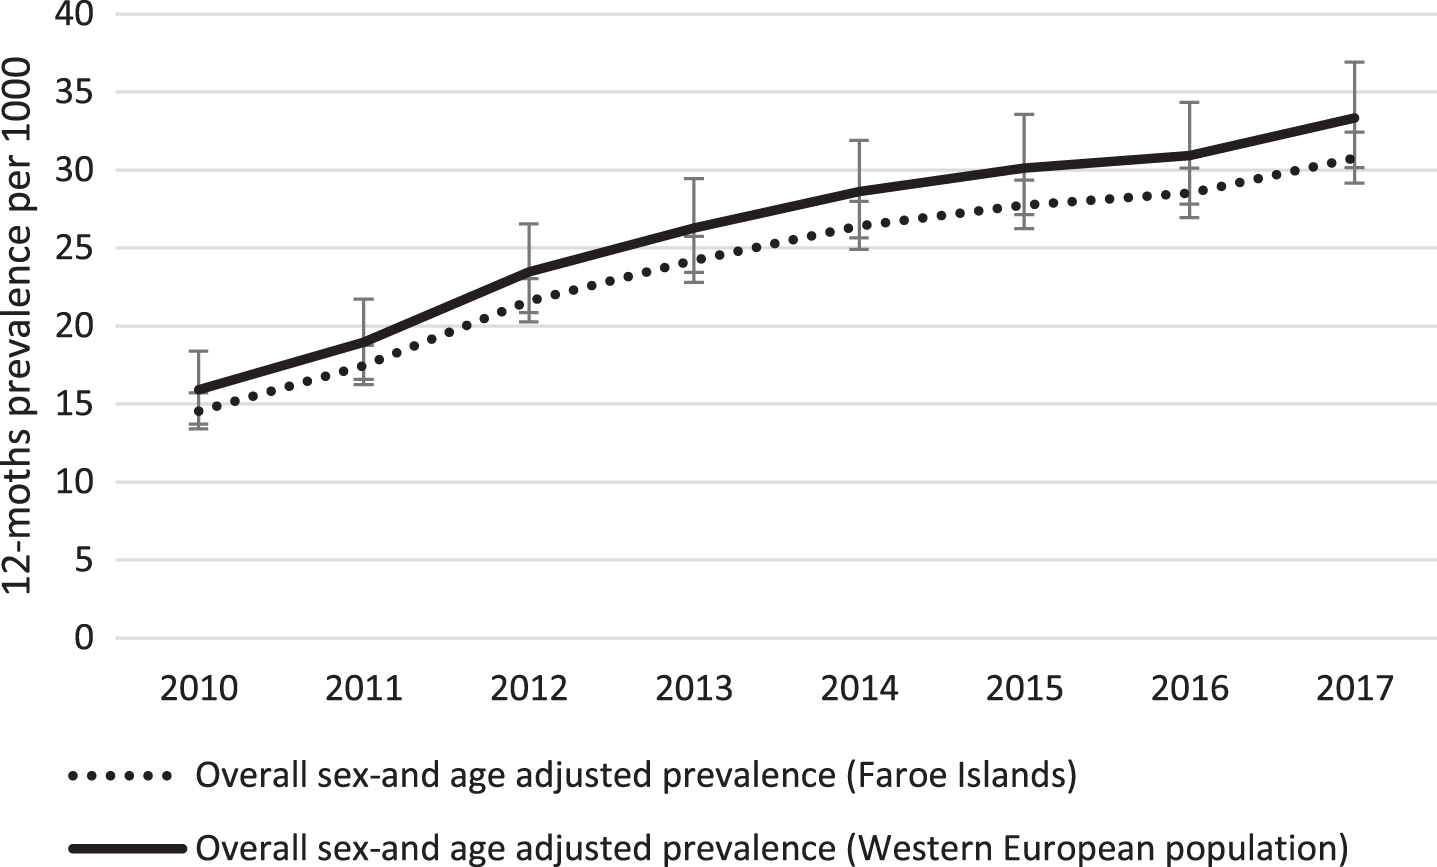 Time trend in age-and sex standardized prevalence of dementia in the Faroe Islands from 2010 to 2017. The Faroese estimates are standardized to the 2010 Faroese and Western European populations, respectively. Error bars represent 95% confidence intervals.